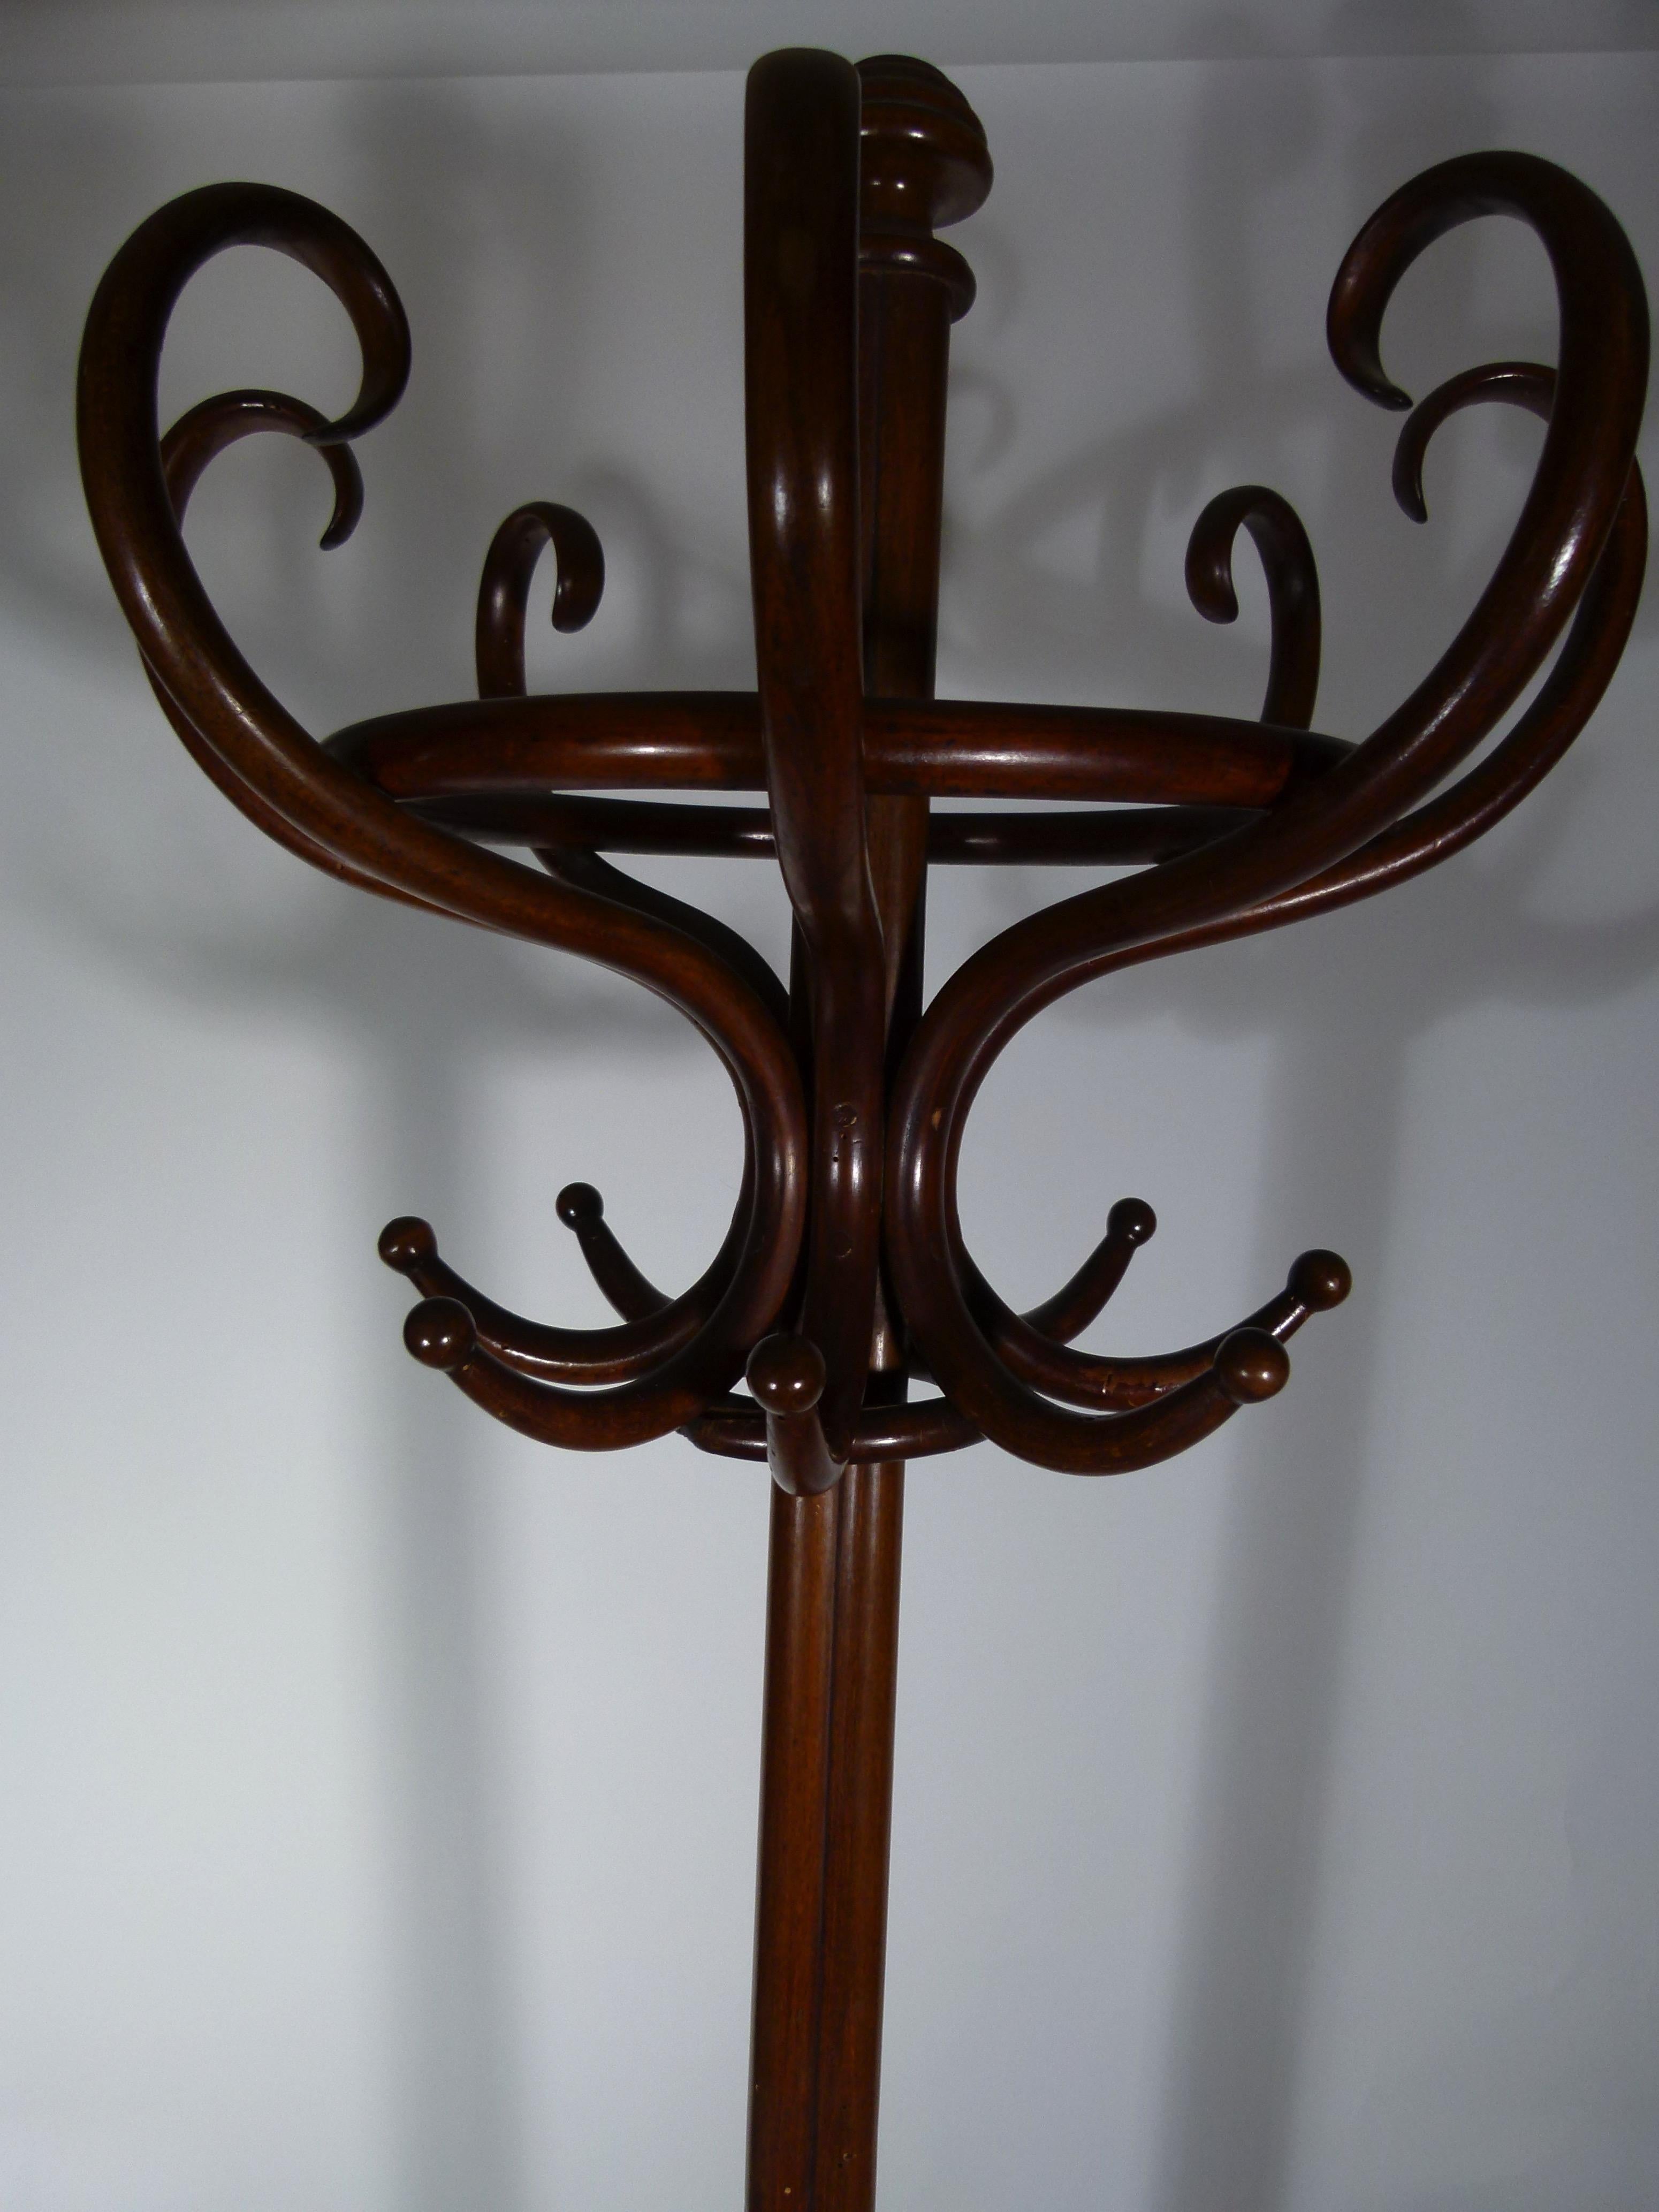 20th century Michael Thonet standing coat rack. We only have this one last piece.